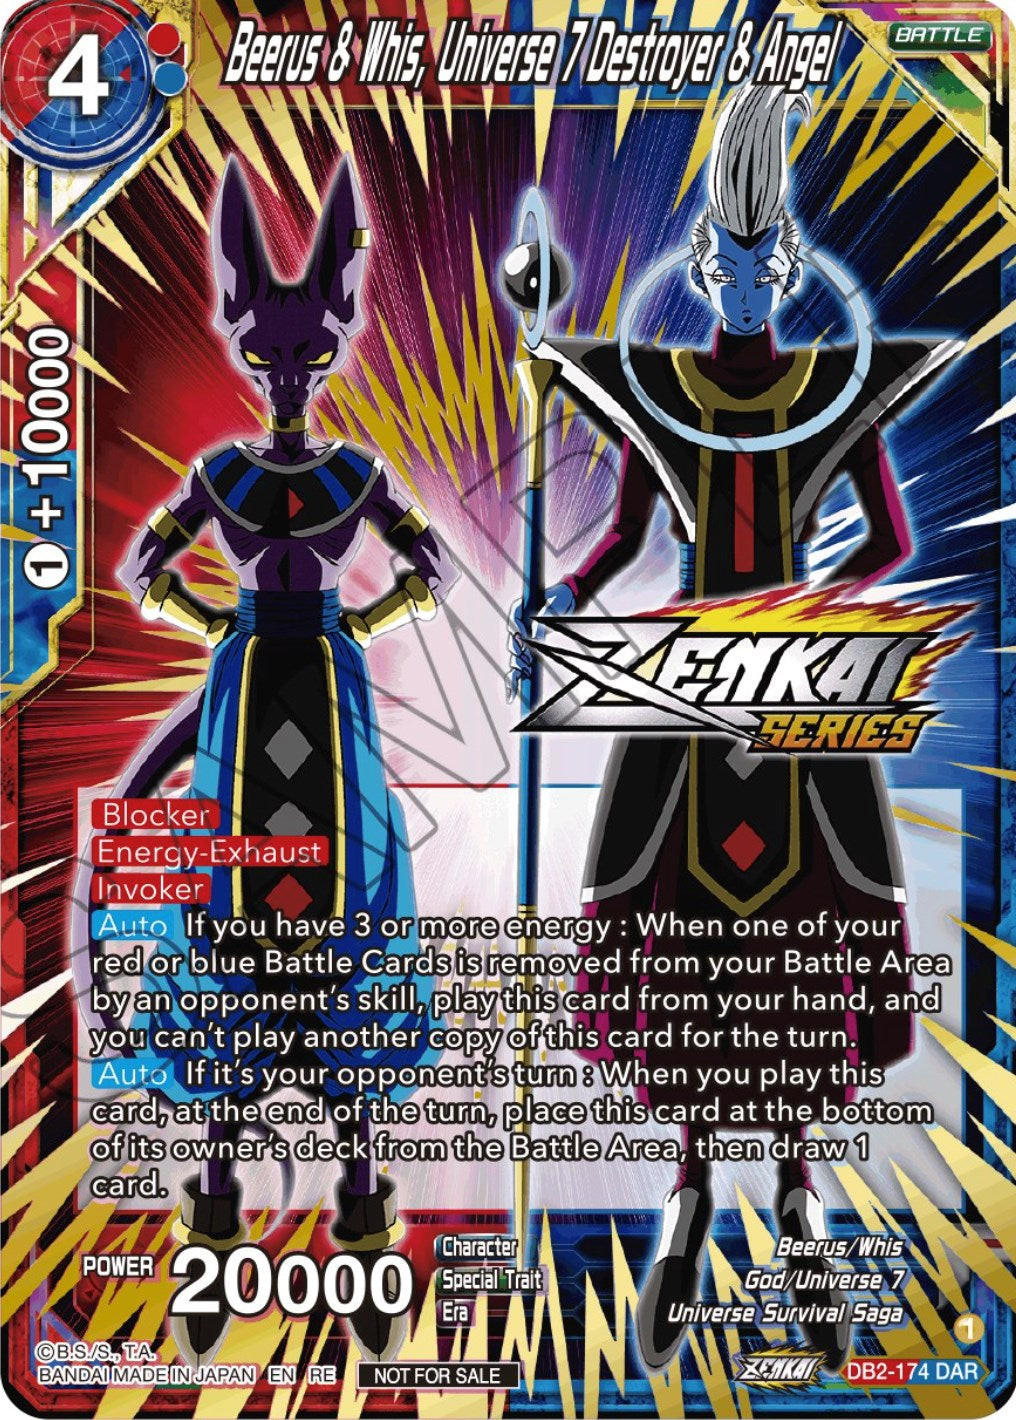 Beerus & Whis, Universe 7 Destroyer & Angel (Event Pack 12) (DB2-174) [Tournament Promotion Cards] | Total Play